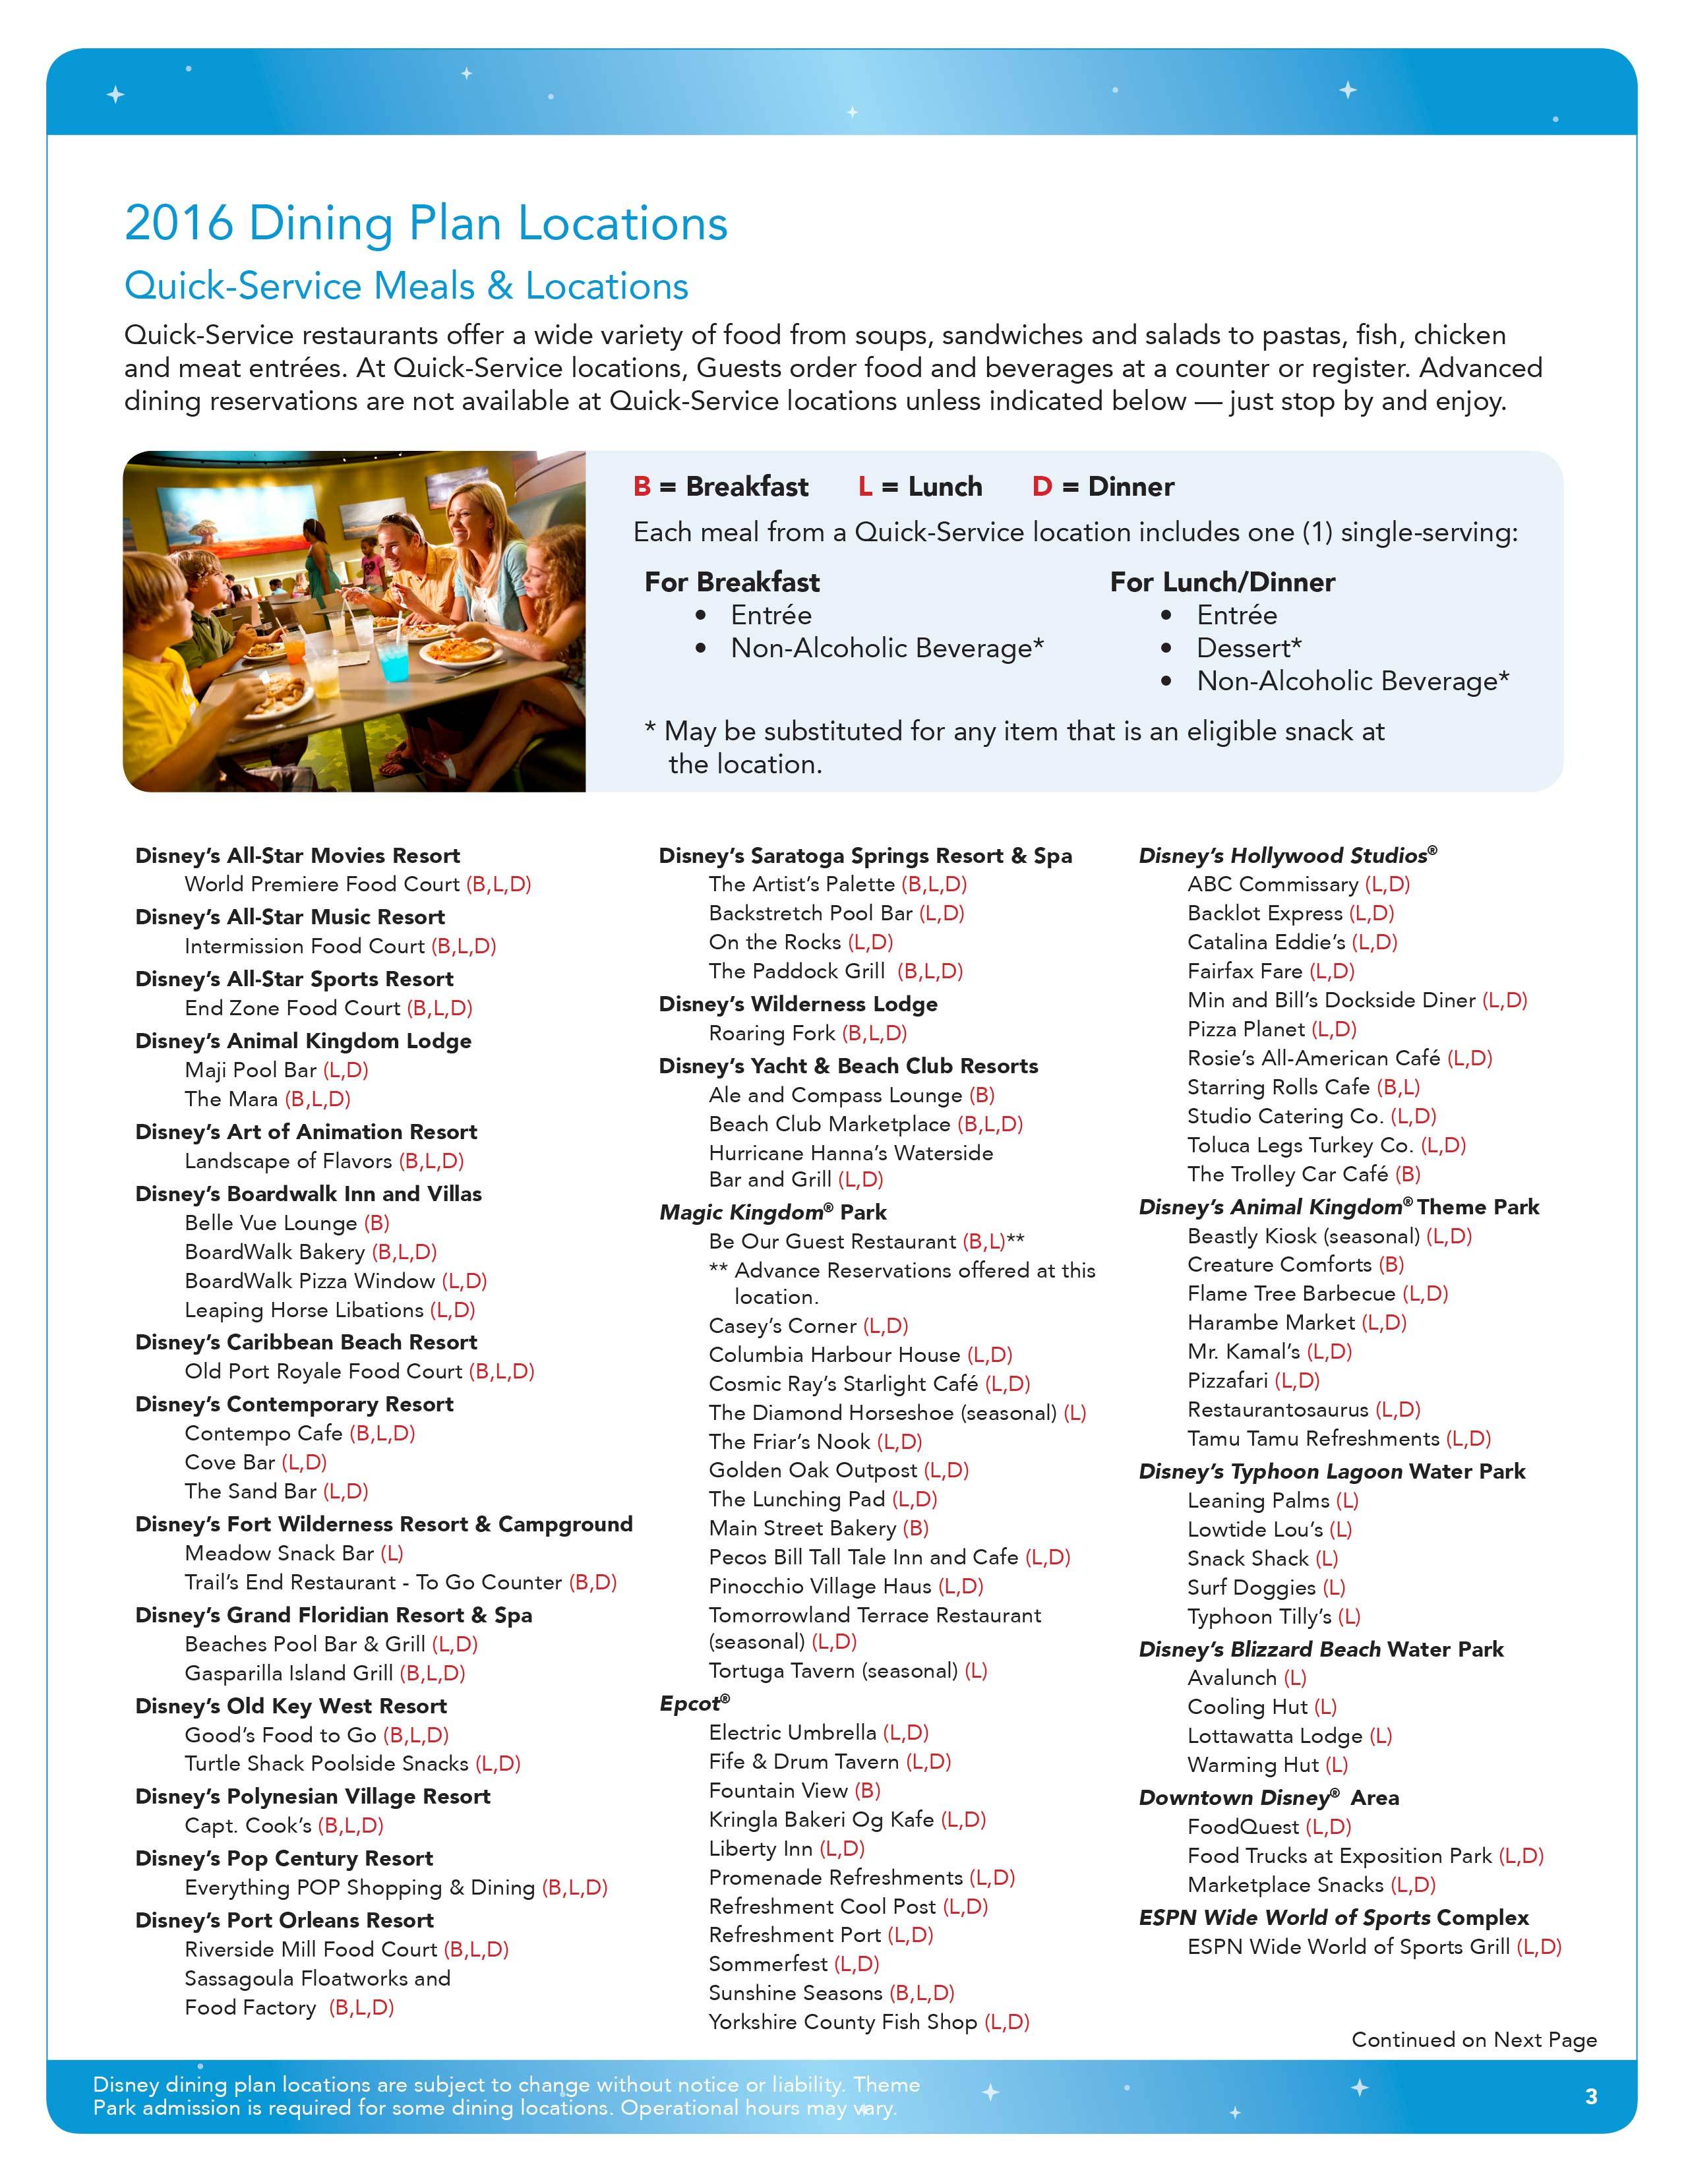 2016 Disney Deluxe Dining Plan brochure - Page 3